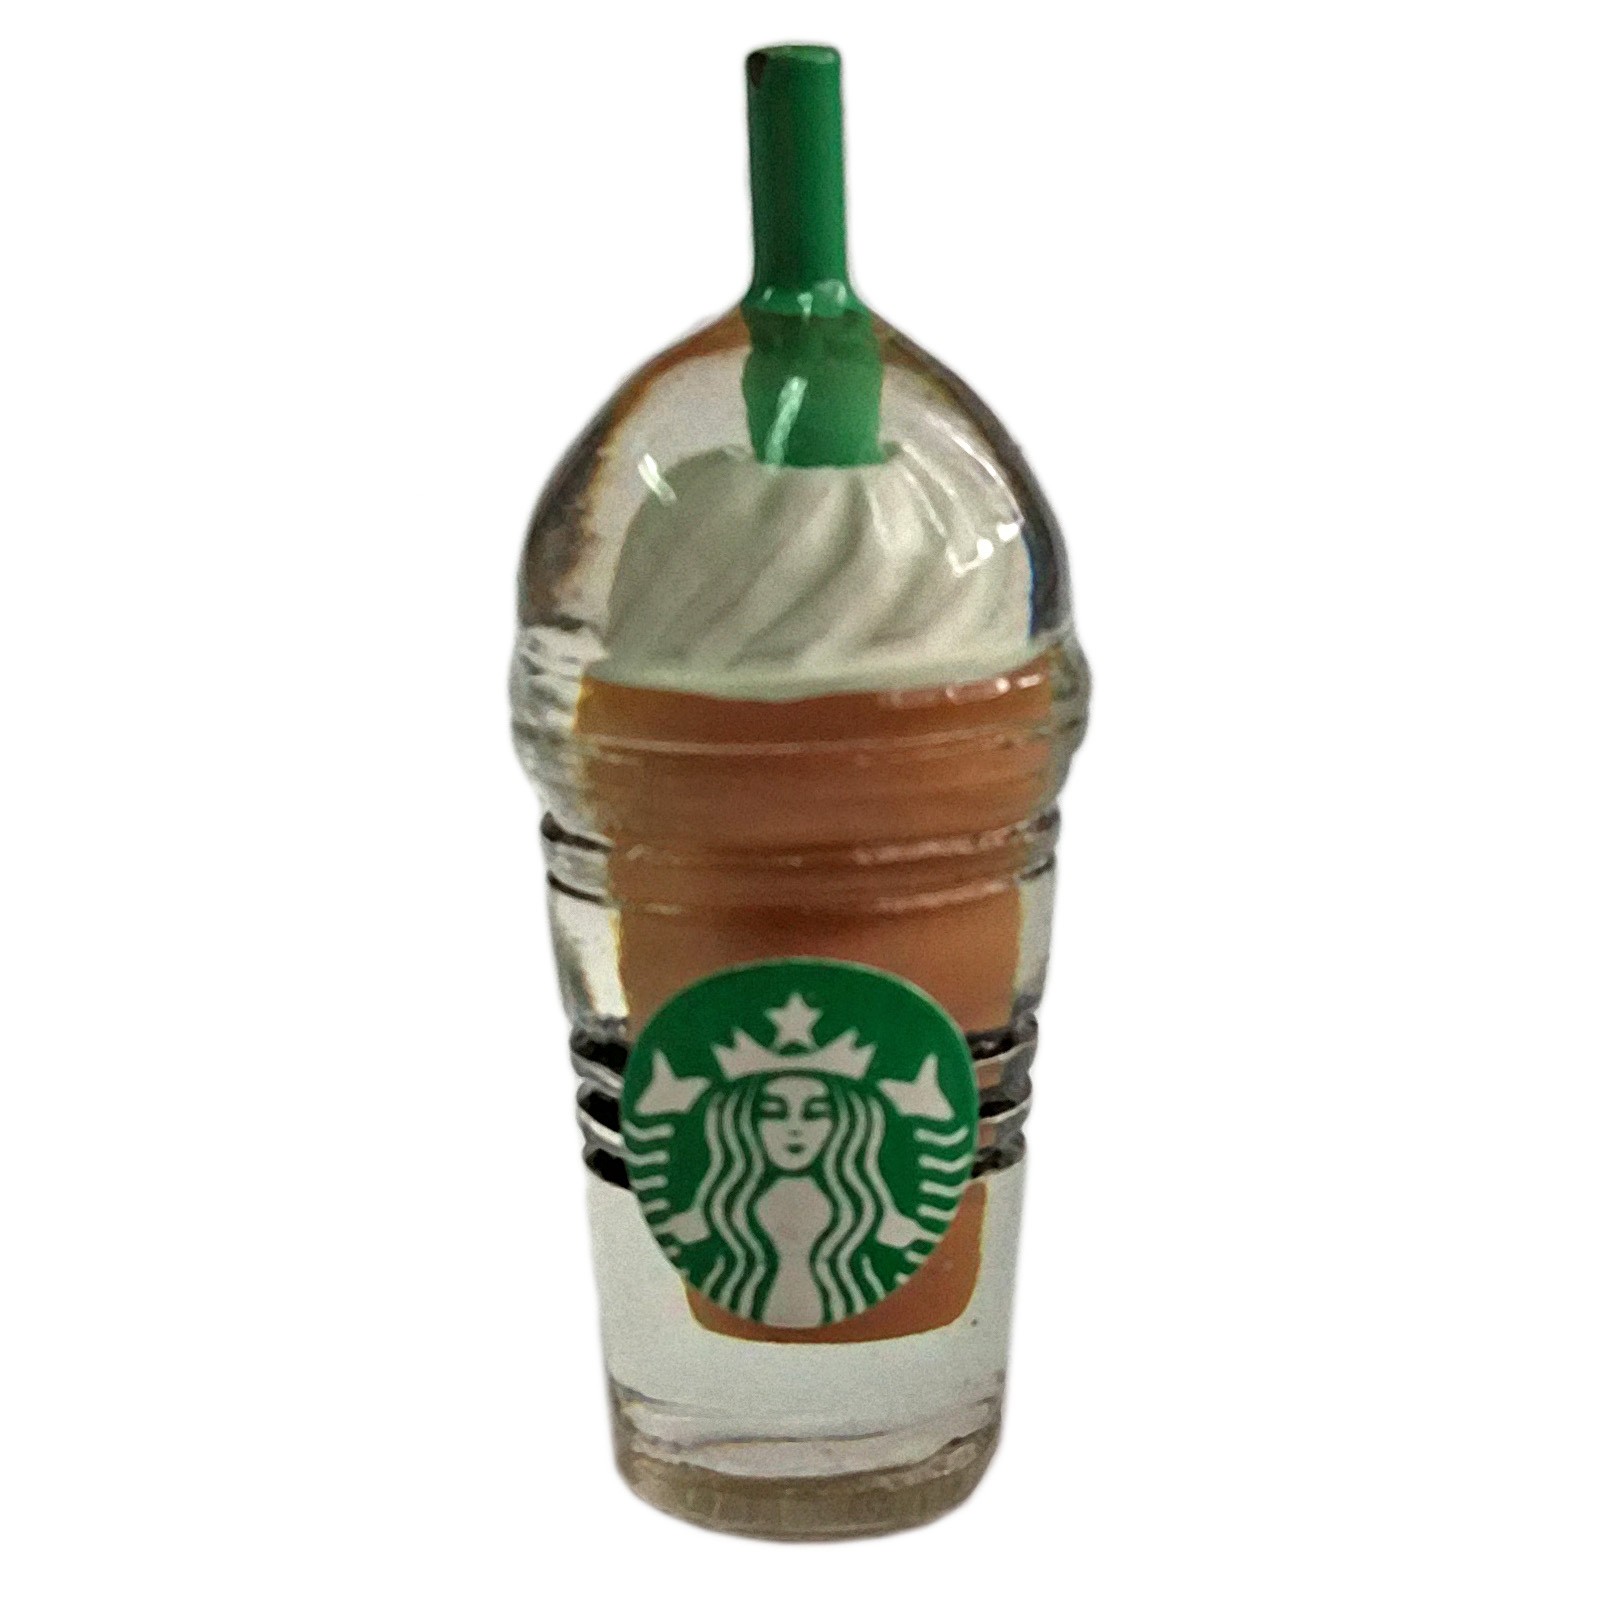 https://cusbox.com/6884/starbucks-dome-tumbler-ice-cold-coffee-cup-bottle-1-6-1-12-scale-doll-s-house-dollhouse-miniature.jpg